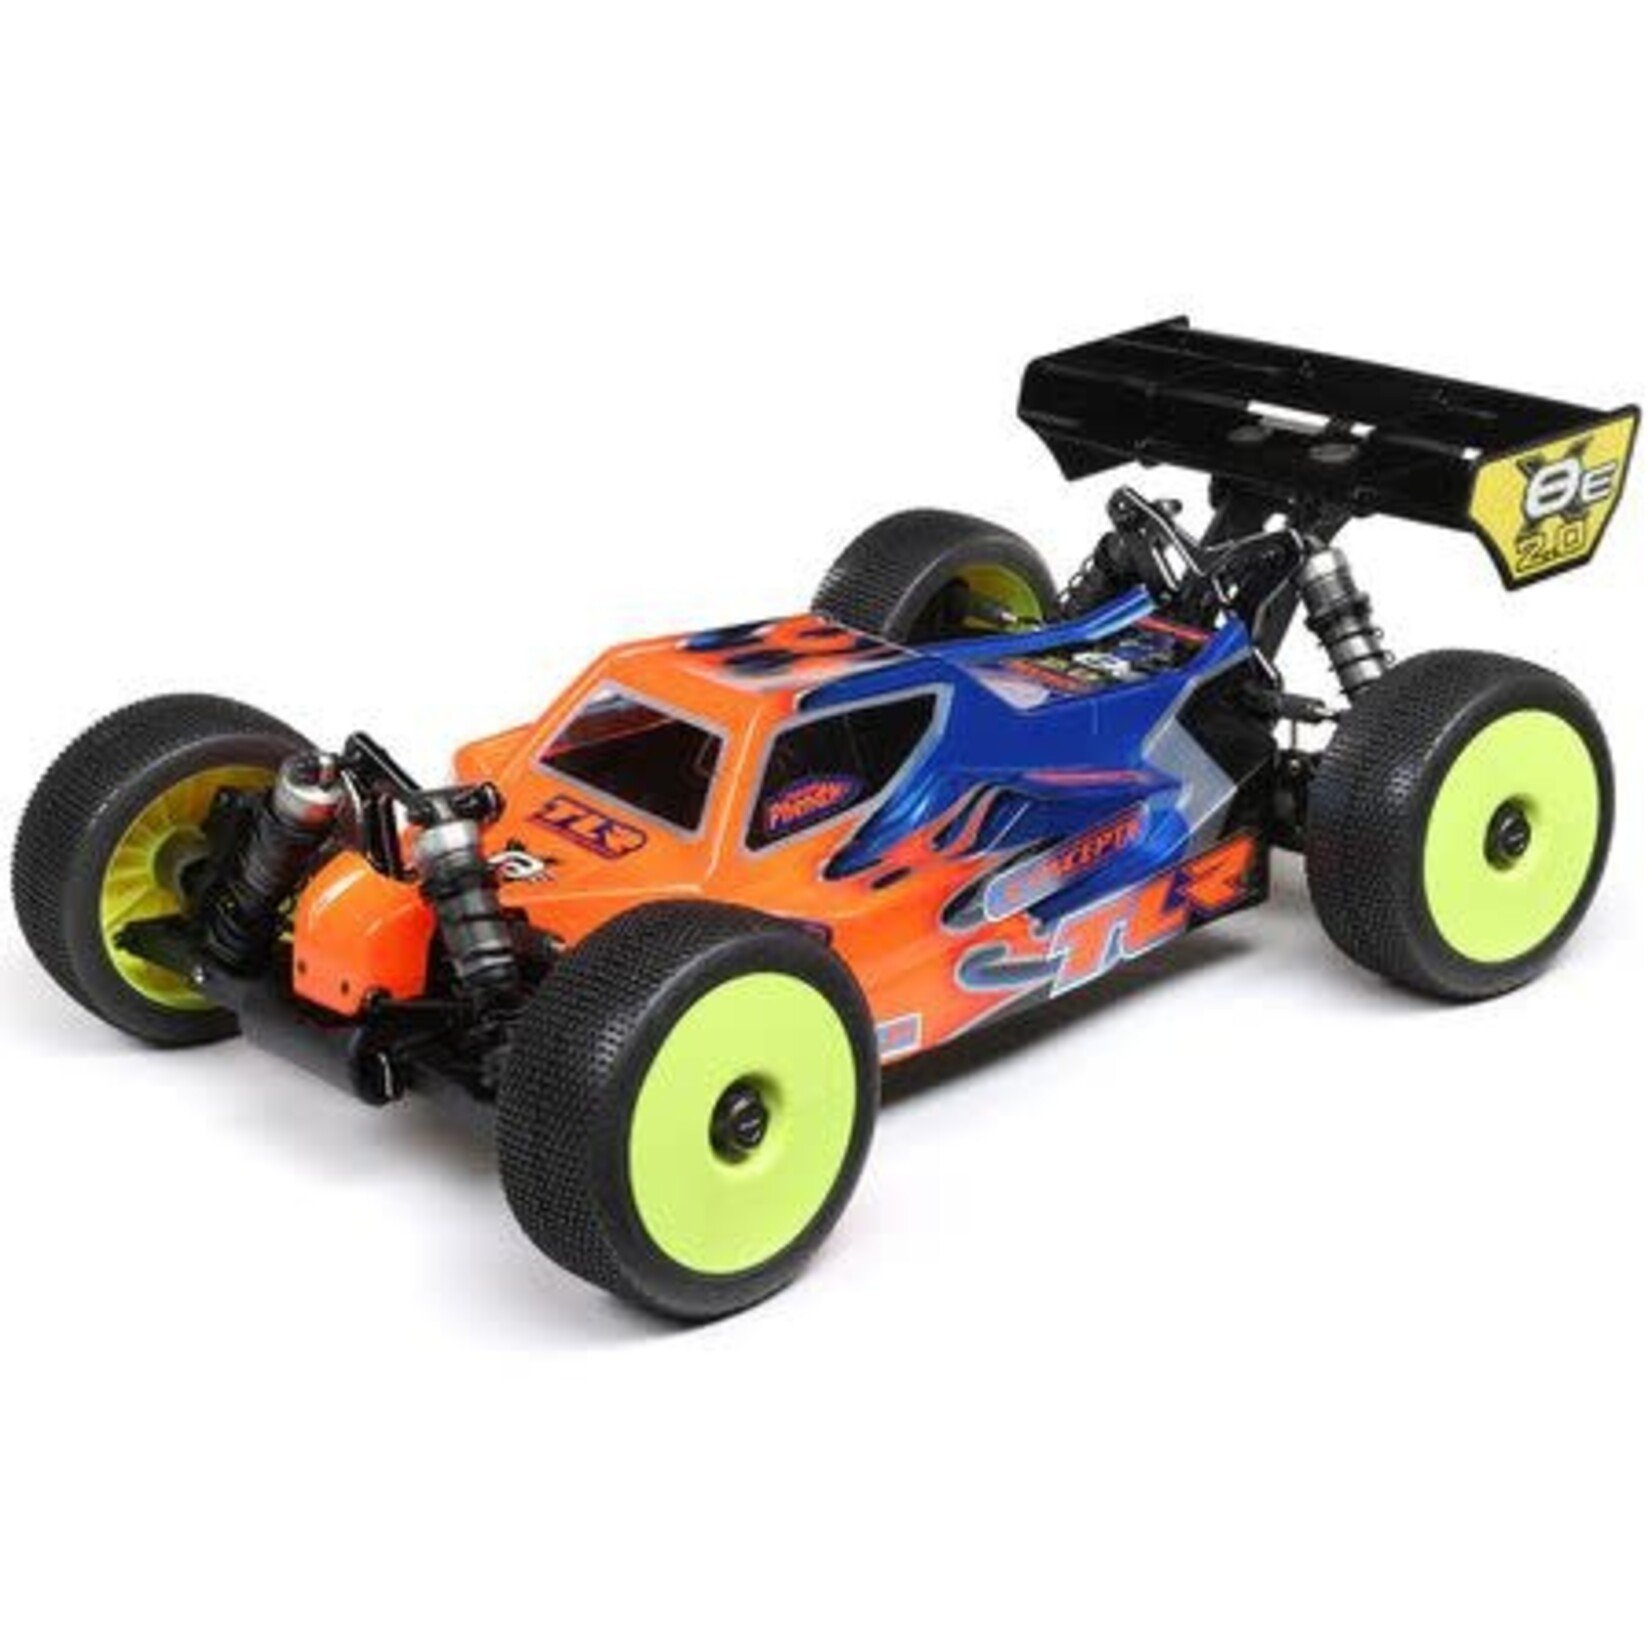 TLR (Team Losi Racing) TLR04012   1/8 8IGHT-X/E 2.0 Combo 4X4 Nitro/Electric Race Buggy Kit